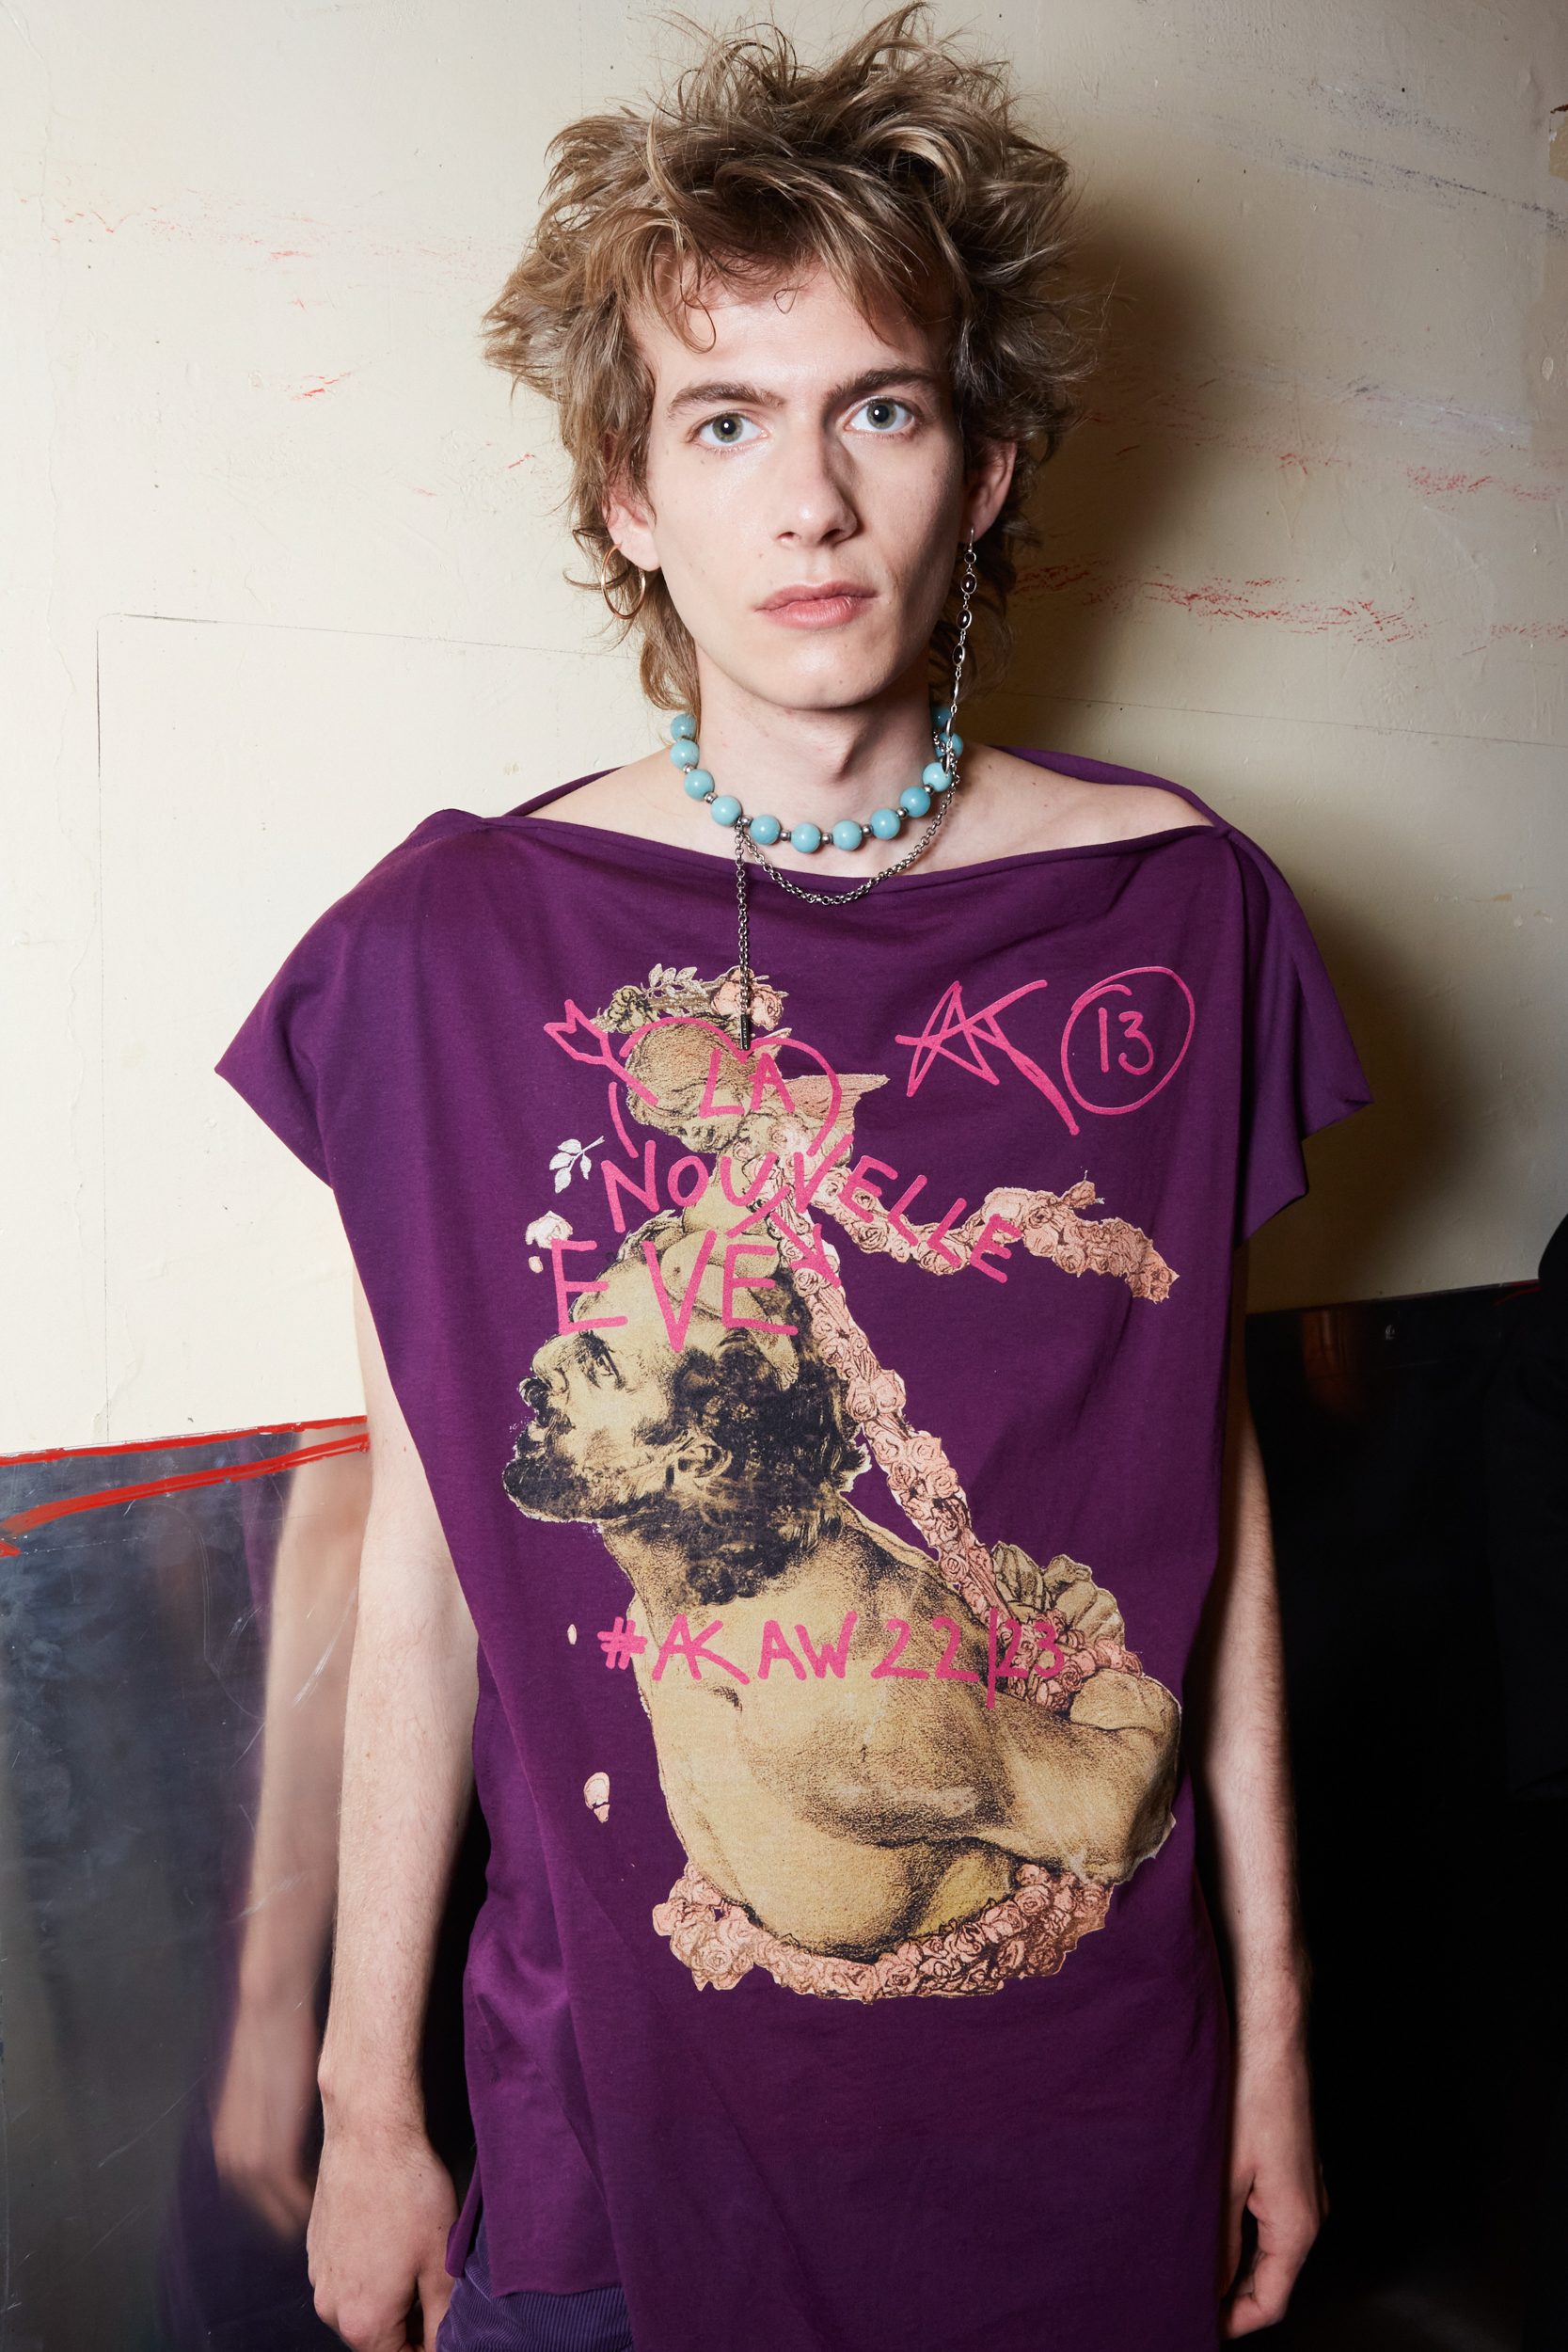 Andreas Kronthaler For Vivienne Westwood Fall 2022 Fashion Show Backstage Fashion Show